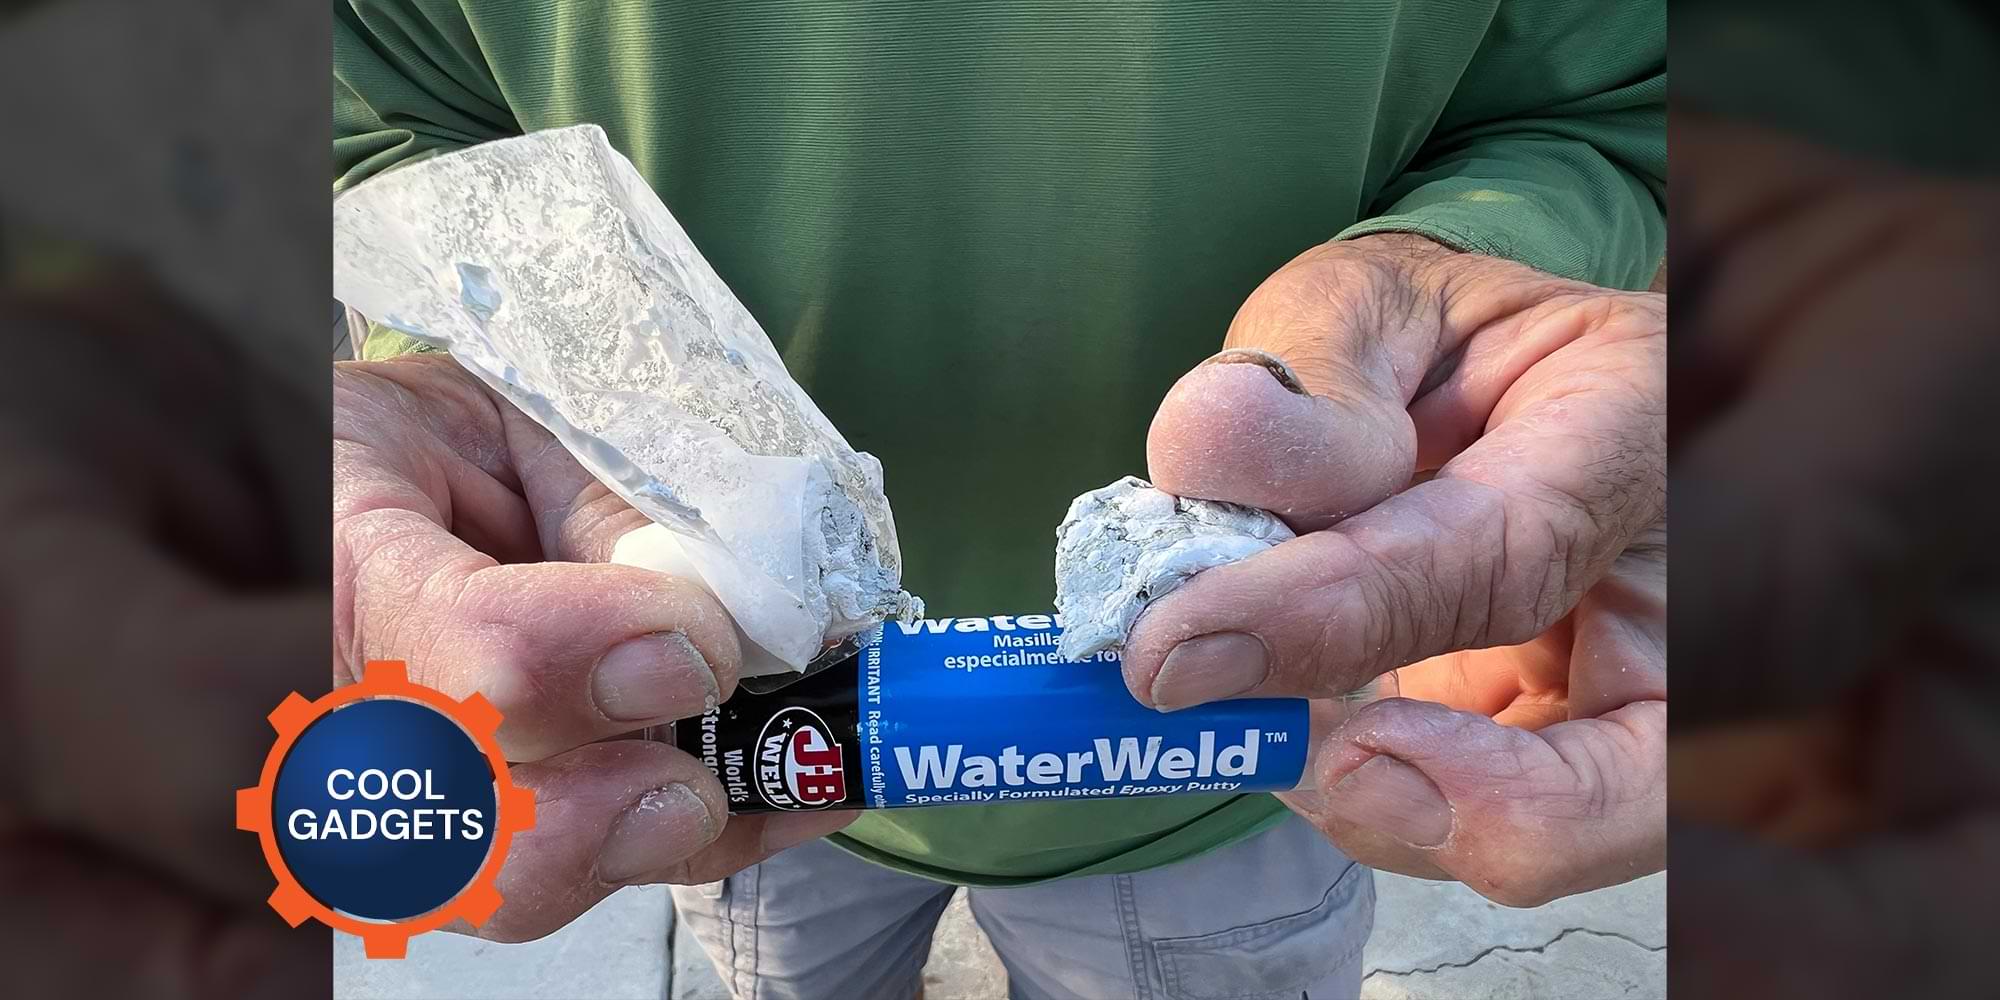 hands hold a container and opened package of WaterWeld Epoxy Putty